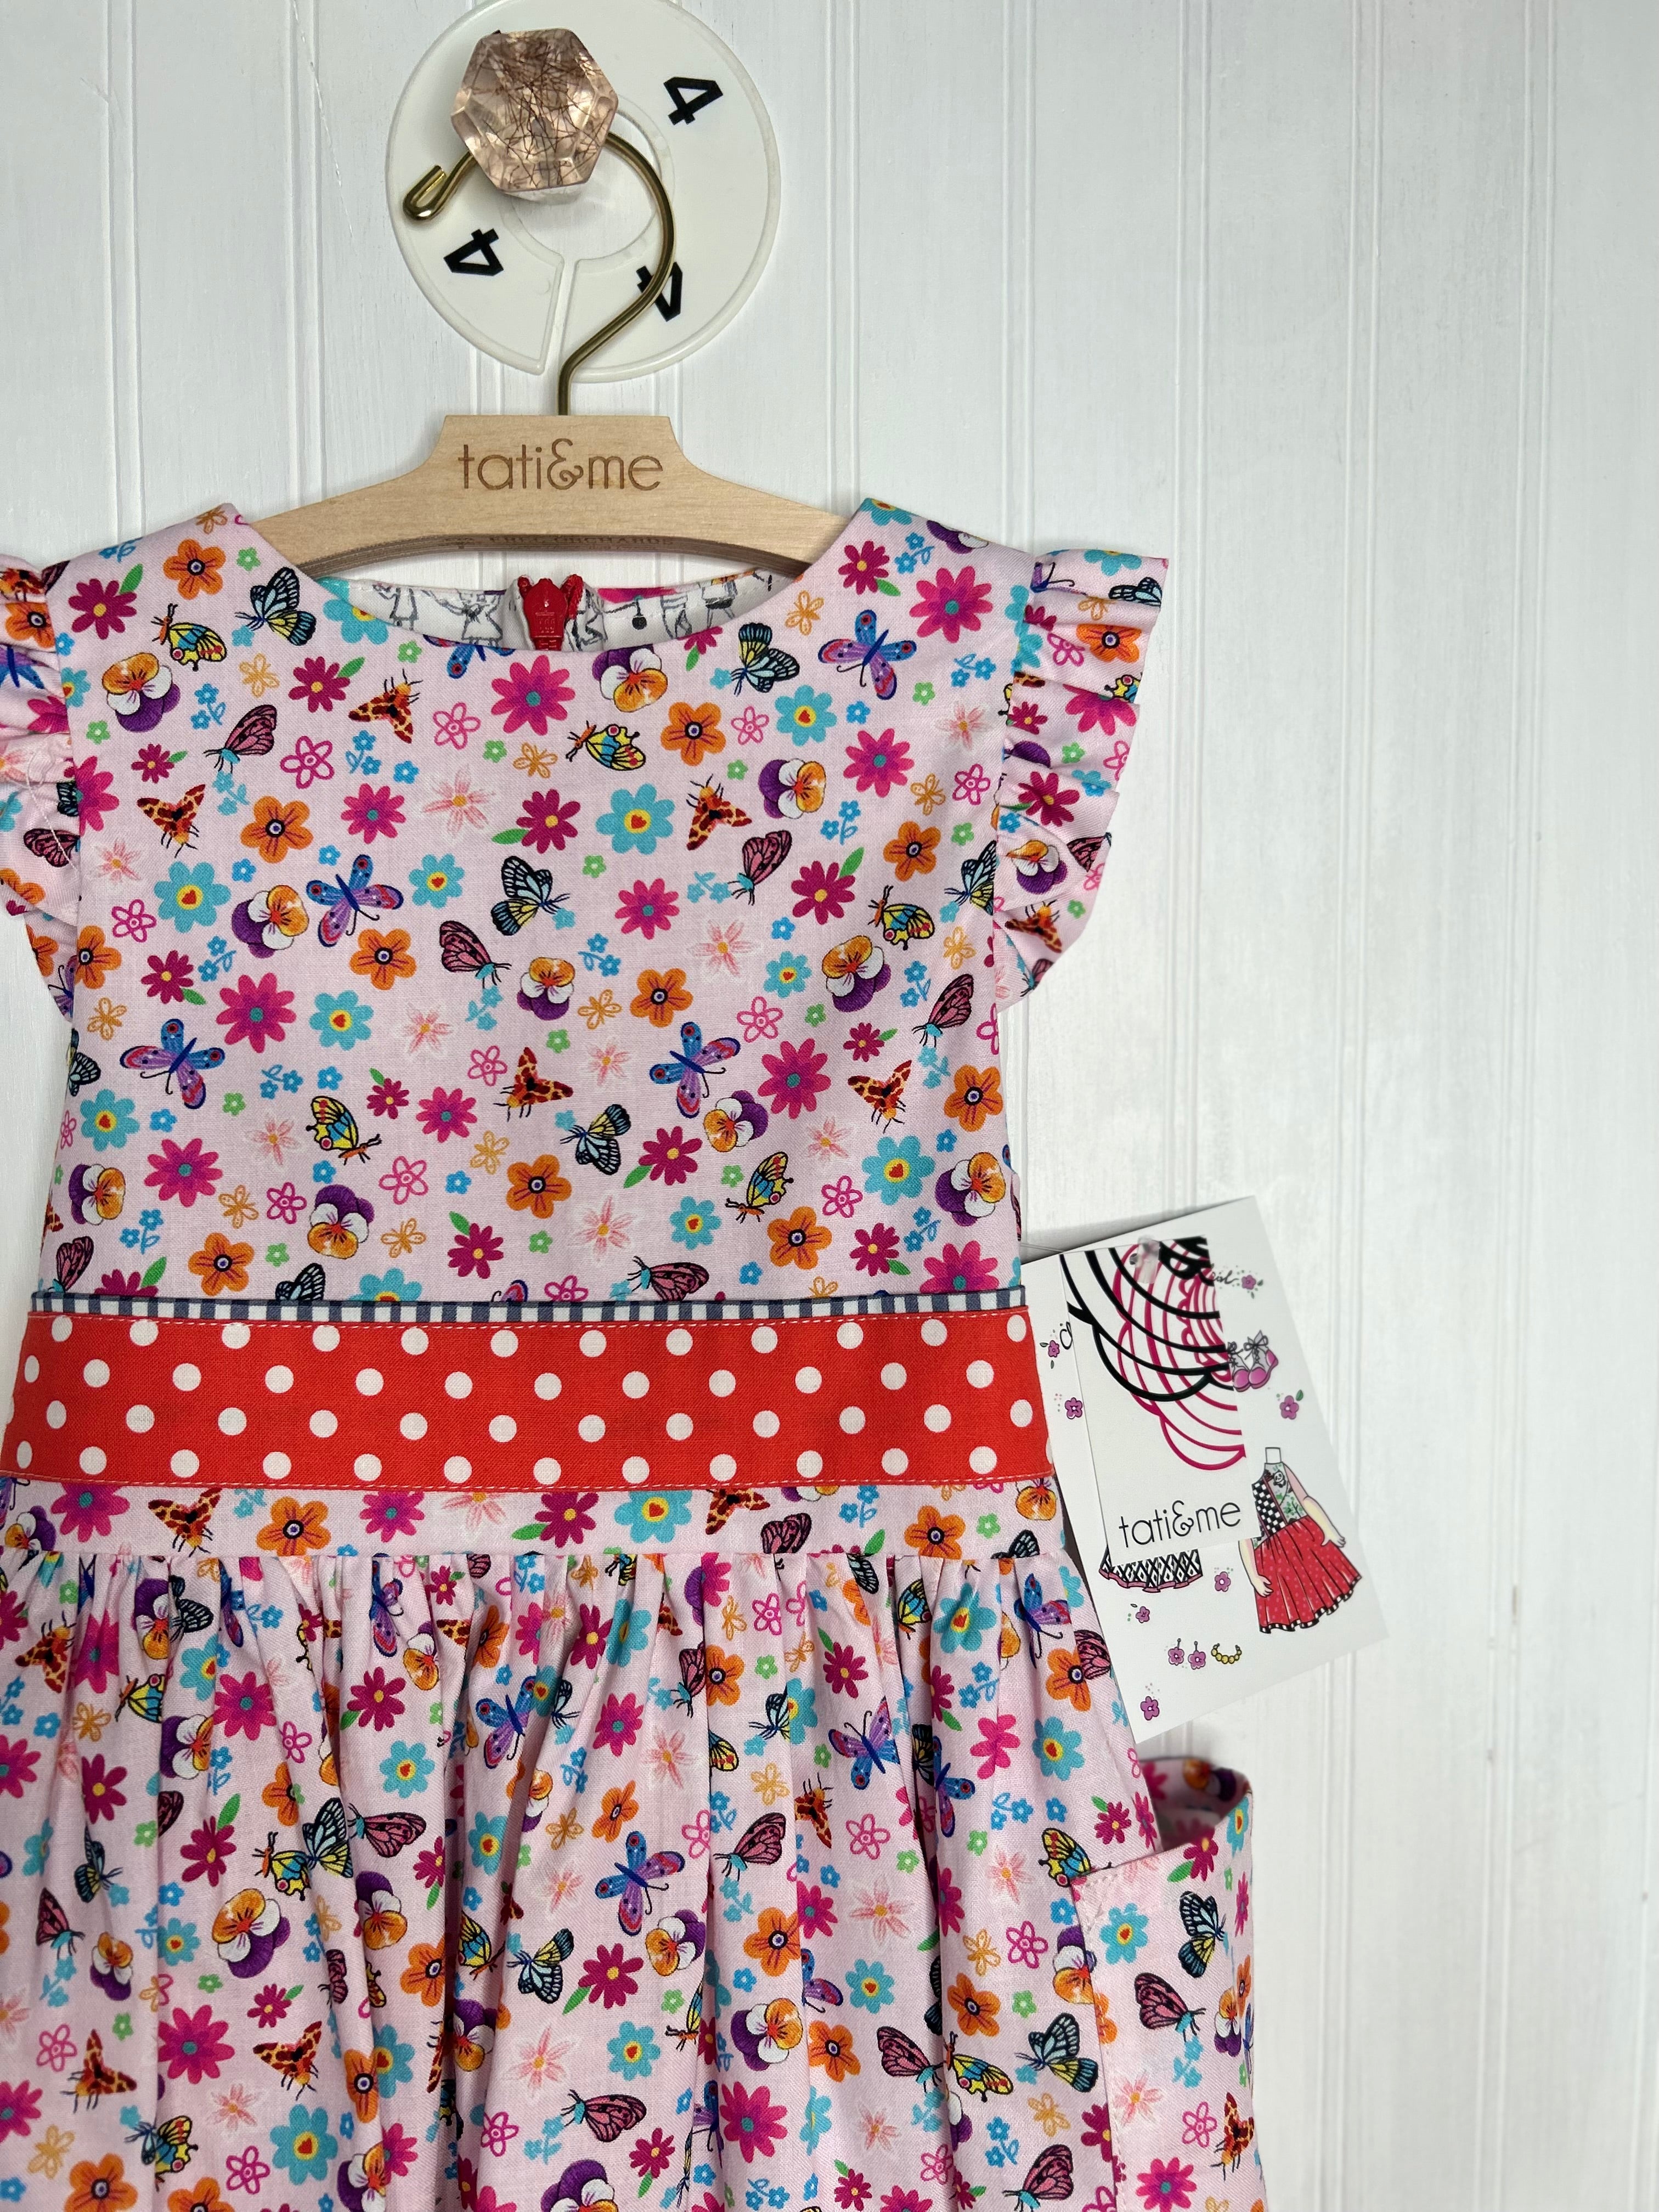 Dainty Pink Floral Pocket Dress- 4 year old